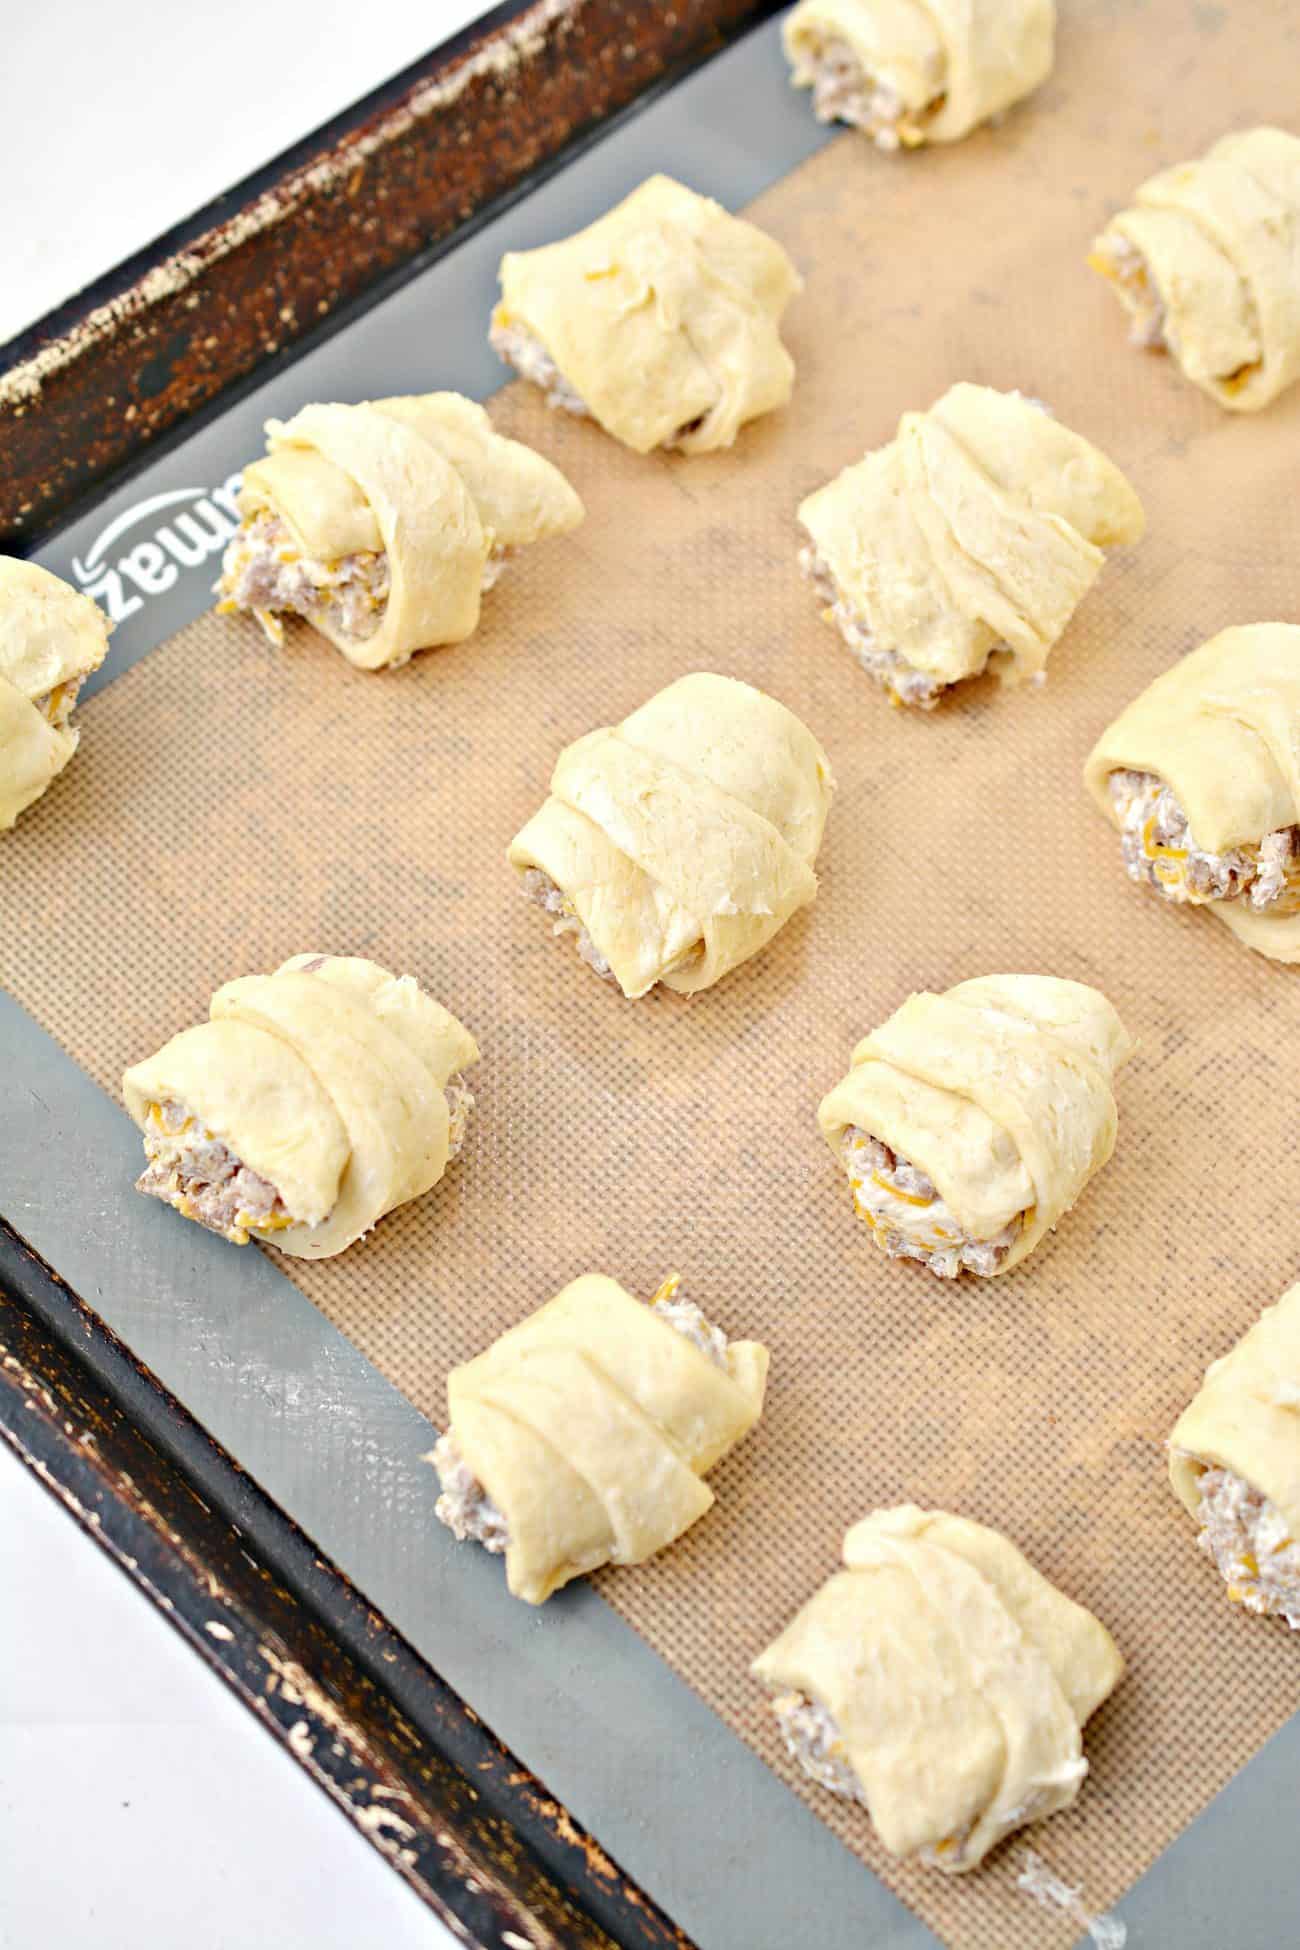 Starting at the widest end, roll the crescent roll dough over the sausage filling forming a mini stuffed crescent roll.